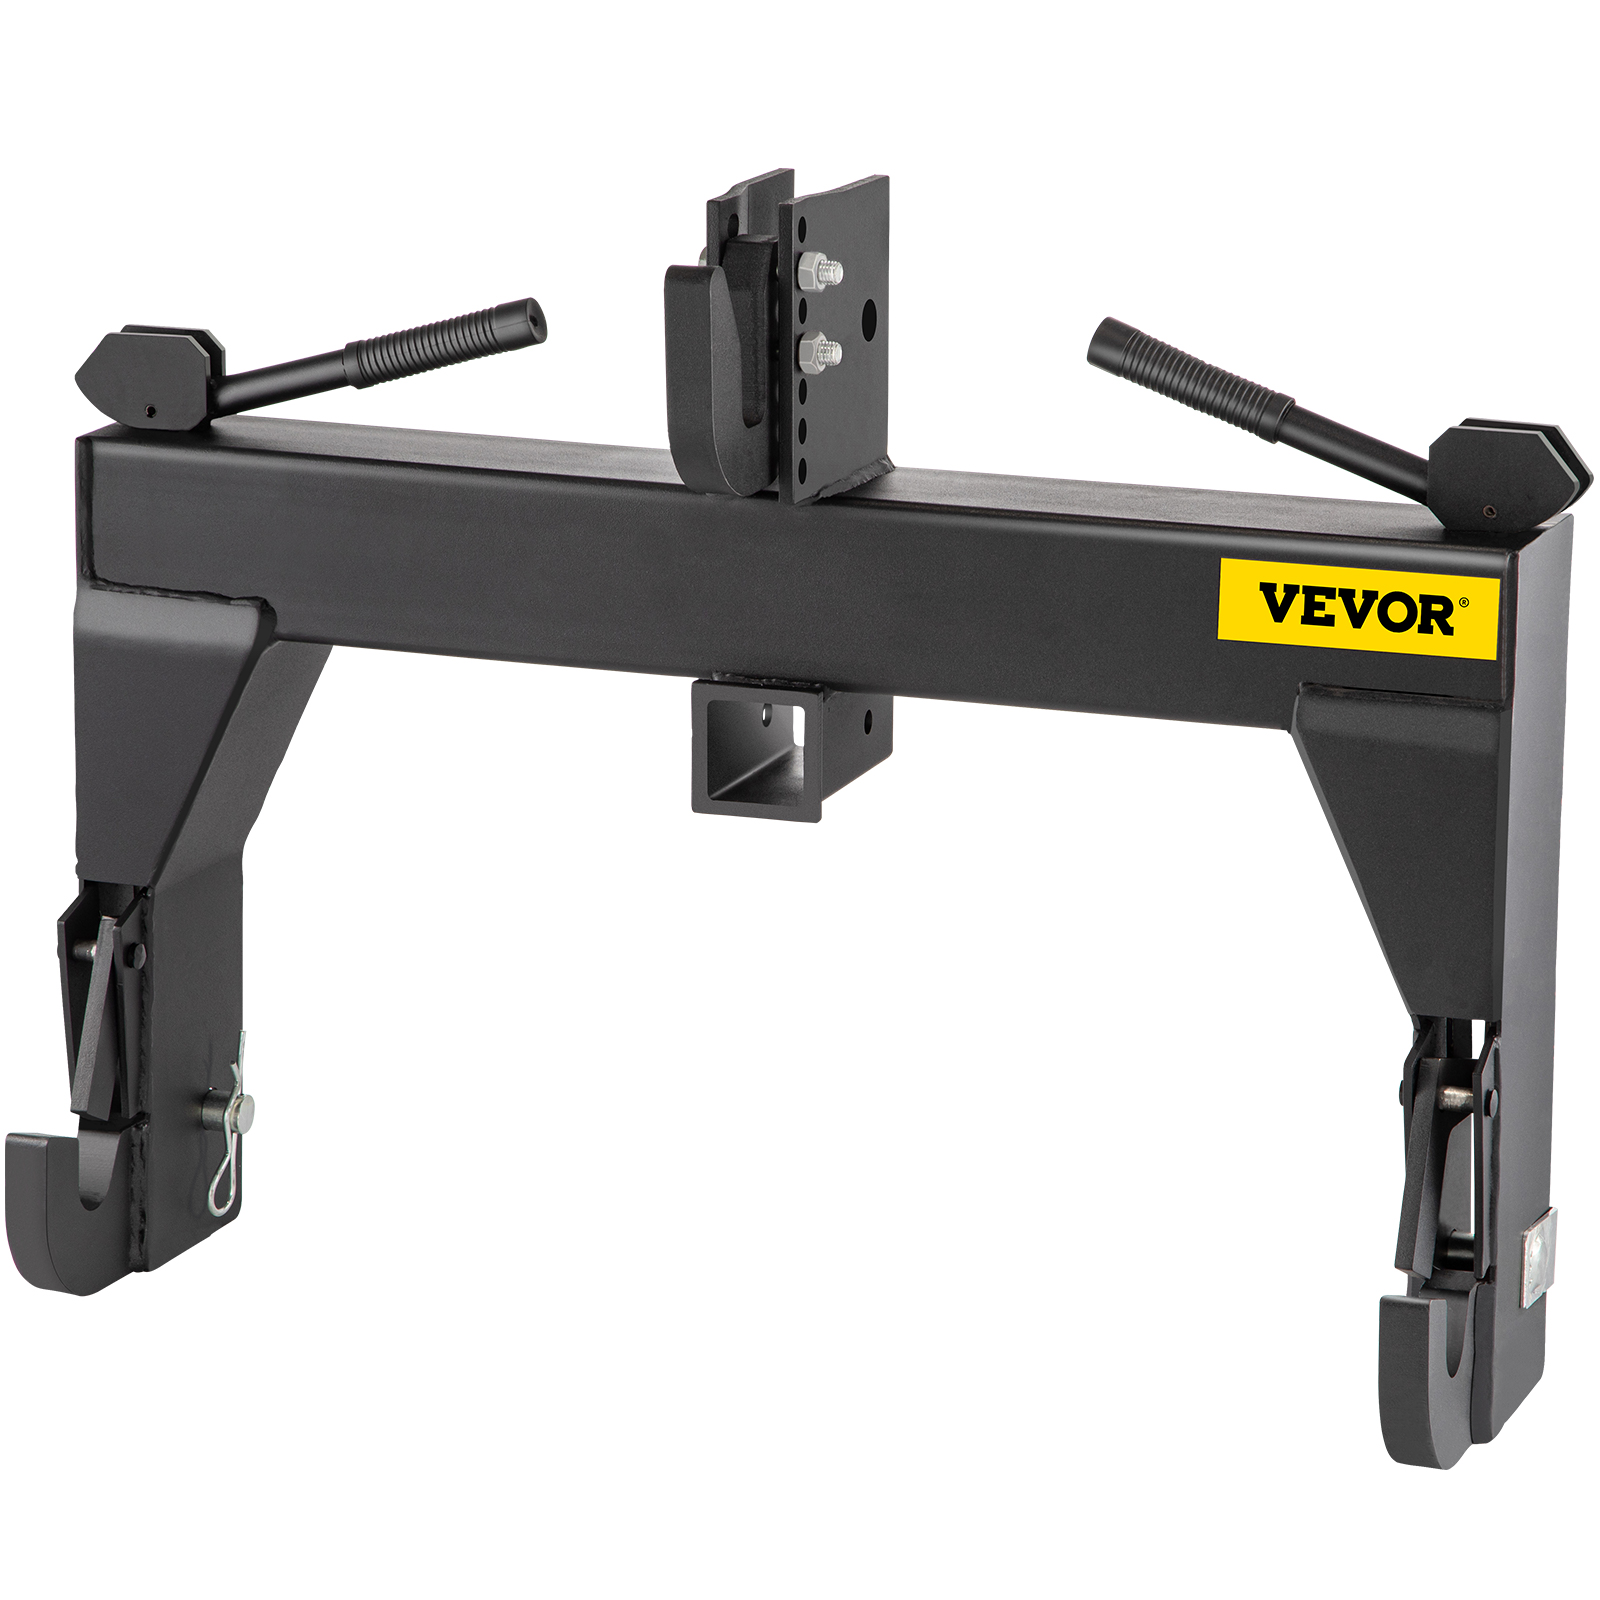 Vevor 3-point Quick Hitch Tractor Quick Hitch Fit For Category 1 &amp 2 Tractors от Vevor Many GEOs